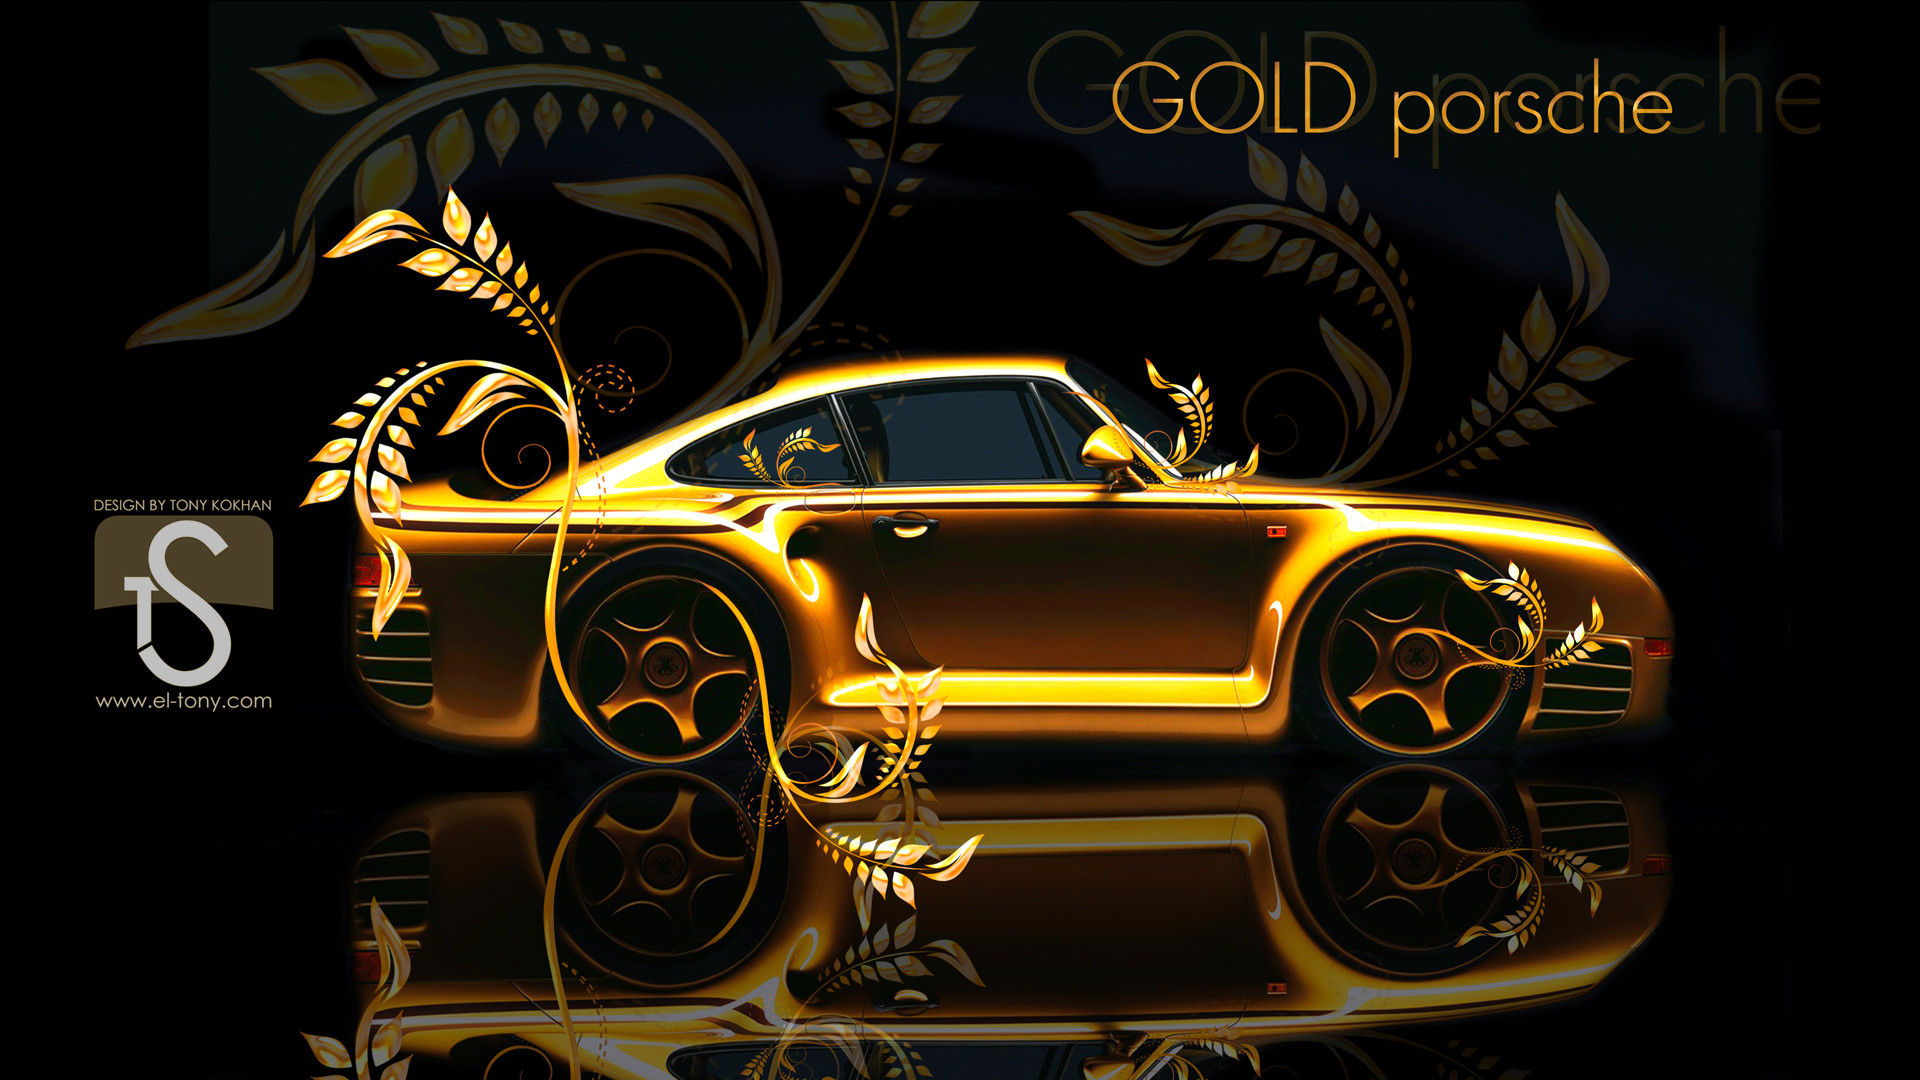 1920x1080 Wallpapers Tagged With GOLD | GOLD Car Wallpapers, Images